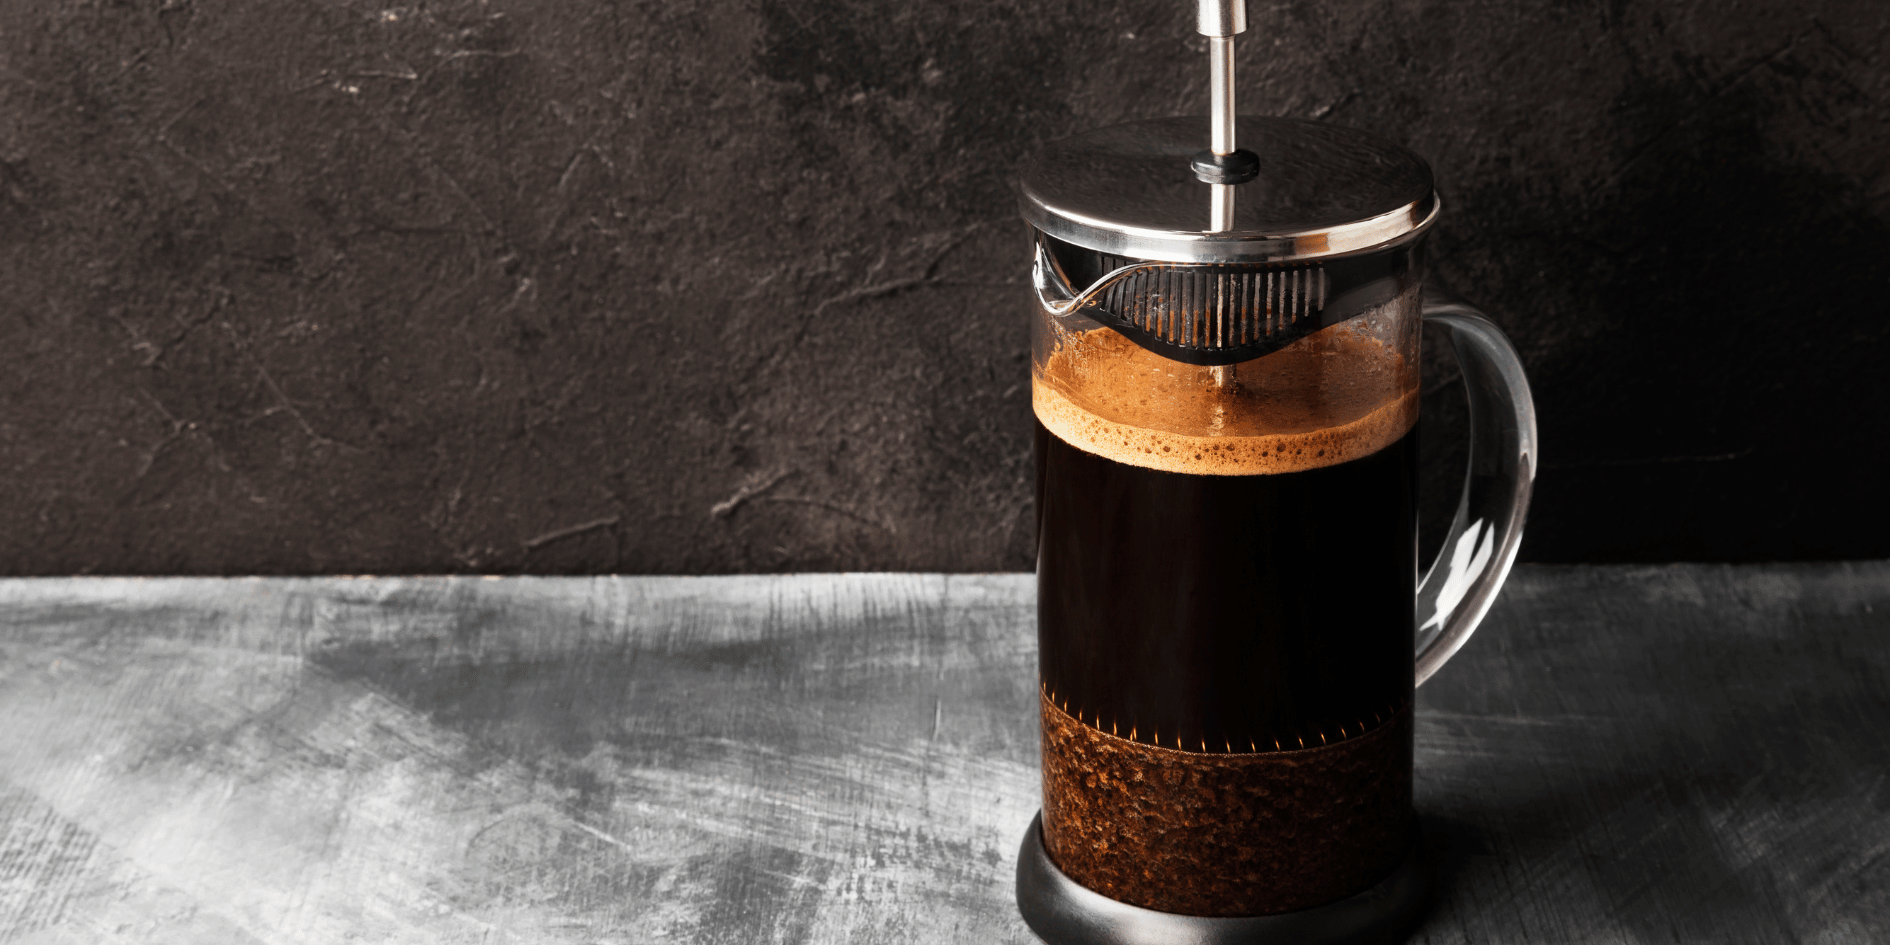 Chemex vs French Press: The Pros and Cons of Each Coffee Making